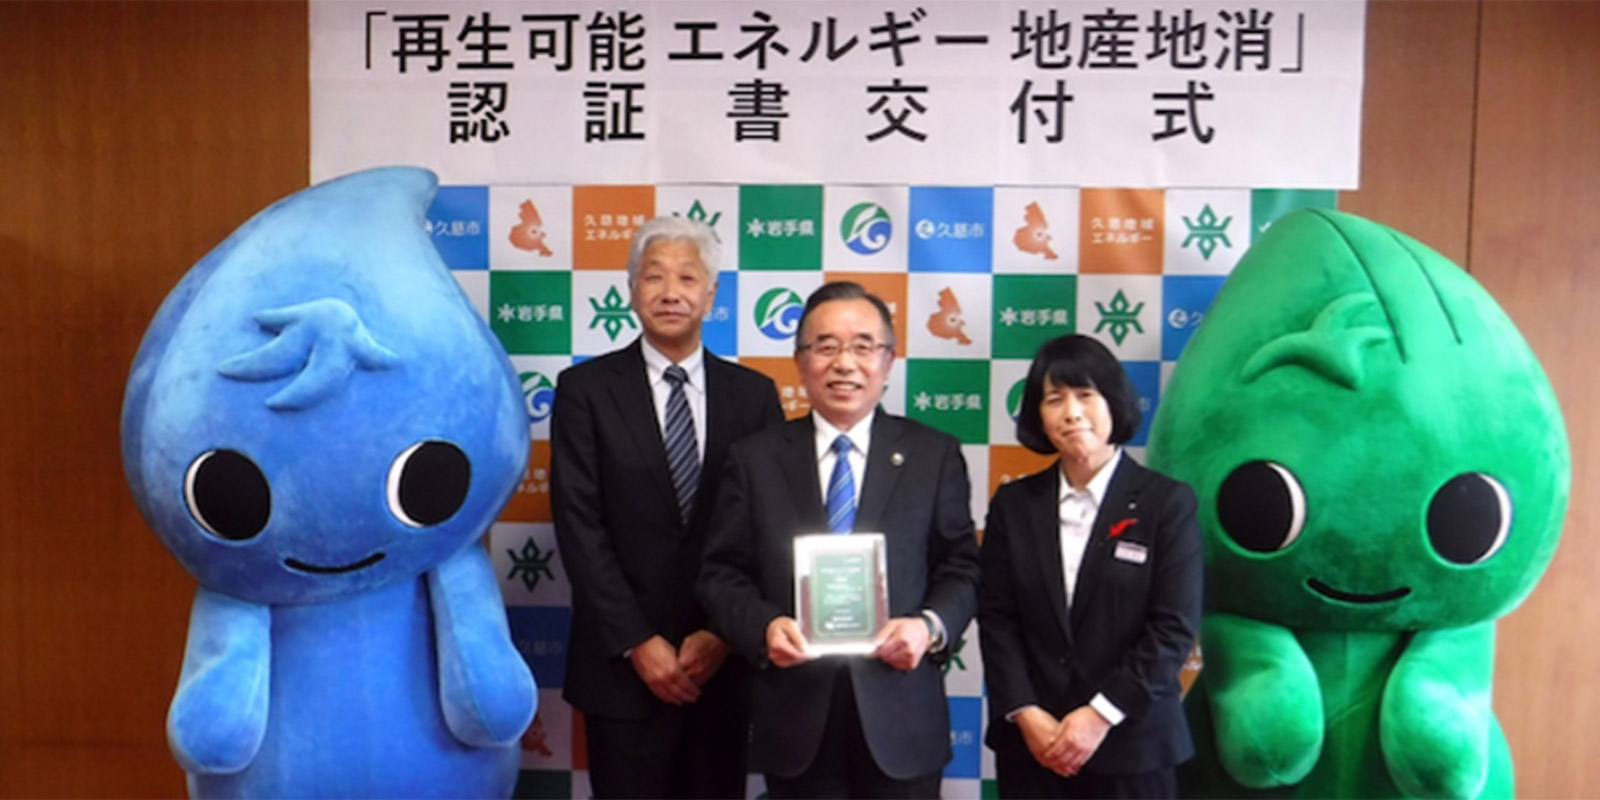 Kuji Regional Energy CEO Haruo Wakabayashi (left) receives a certificate for the local production and consumption of renewable energy from the mayor of Kuji city, Joji Endo (center) | Courtesy of Kuji Regional Energy Co Ltd